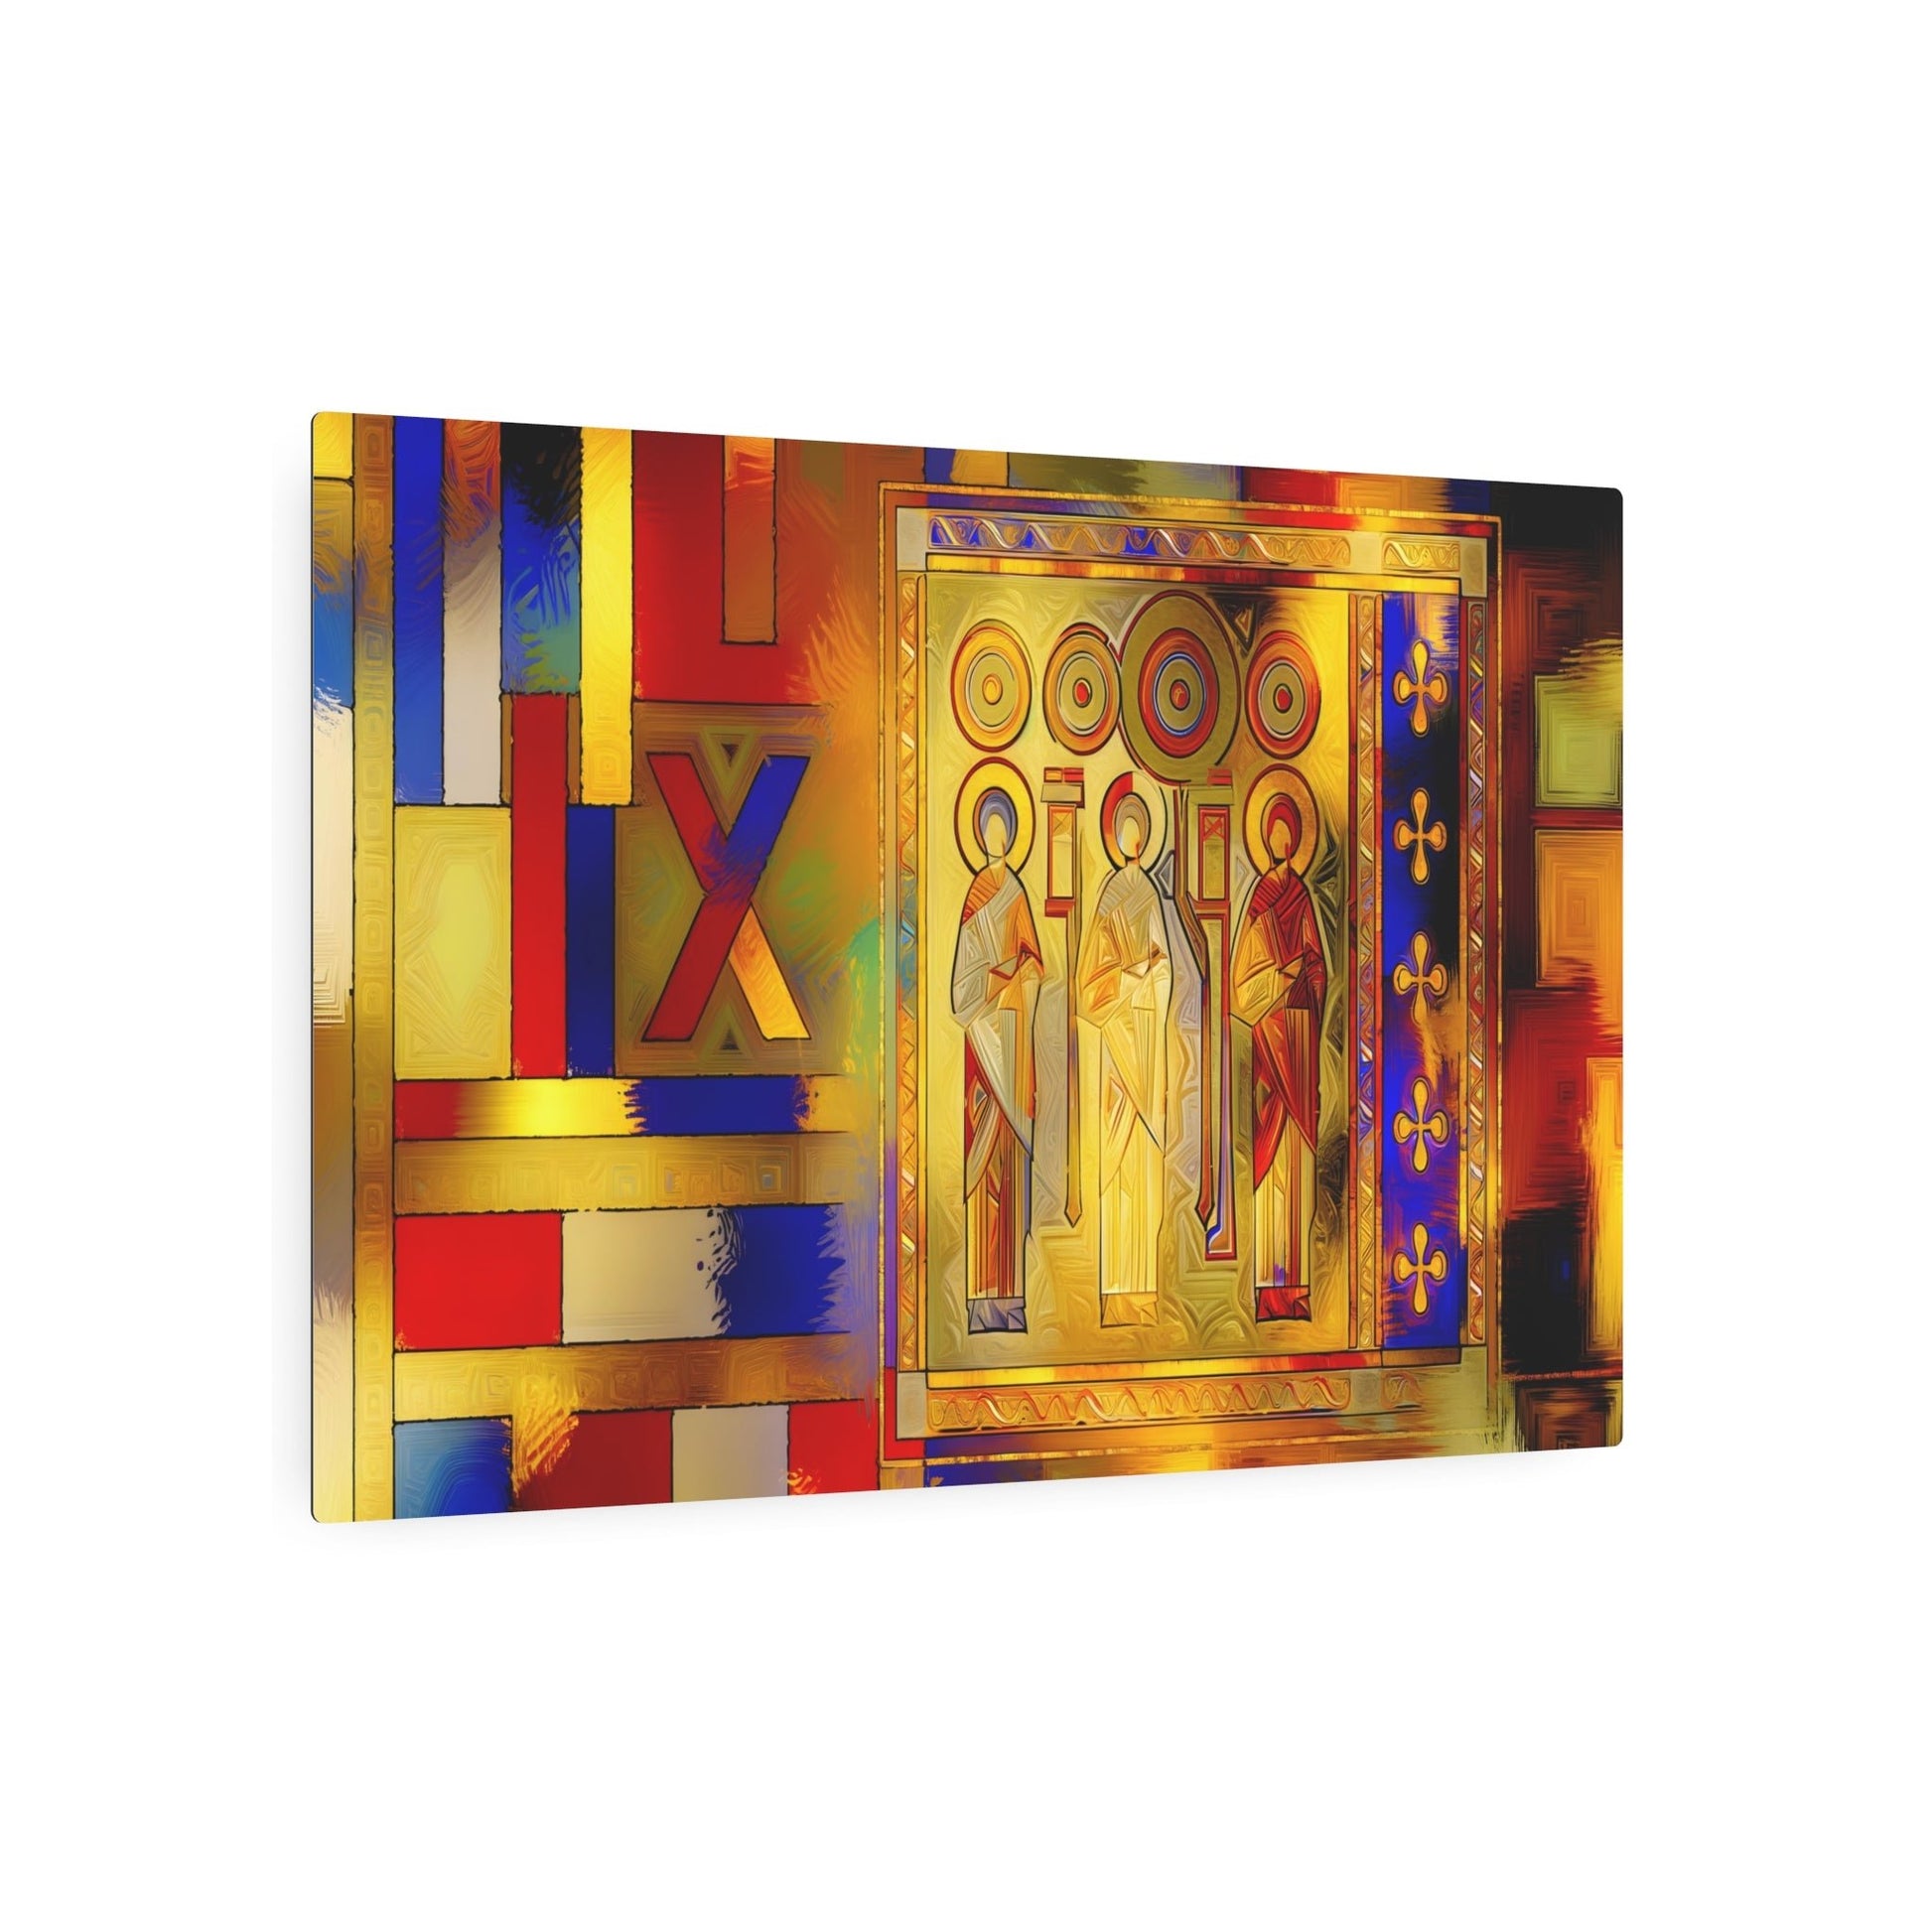 Metal Poster Art | "Byzantine Art Scene Print: Lush, Iconic Traditional Design with Bold Colors and Golden Details - Non-Western & Global Styles Collection" - Metal Poster Art 36″ x 24″ (Horizontal) 0.12''